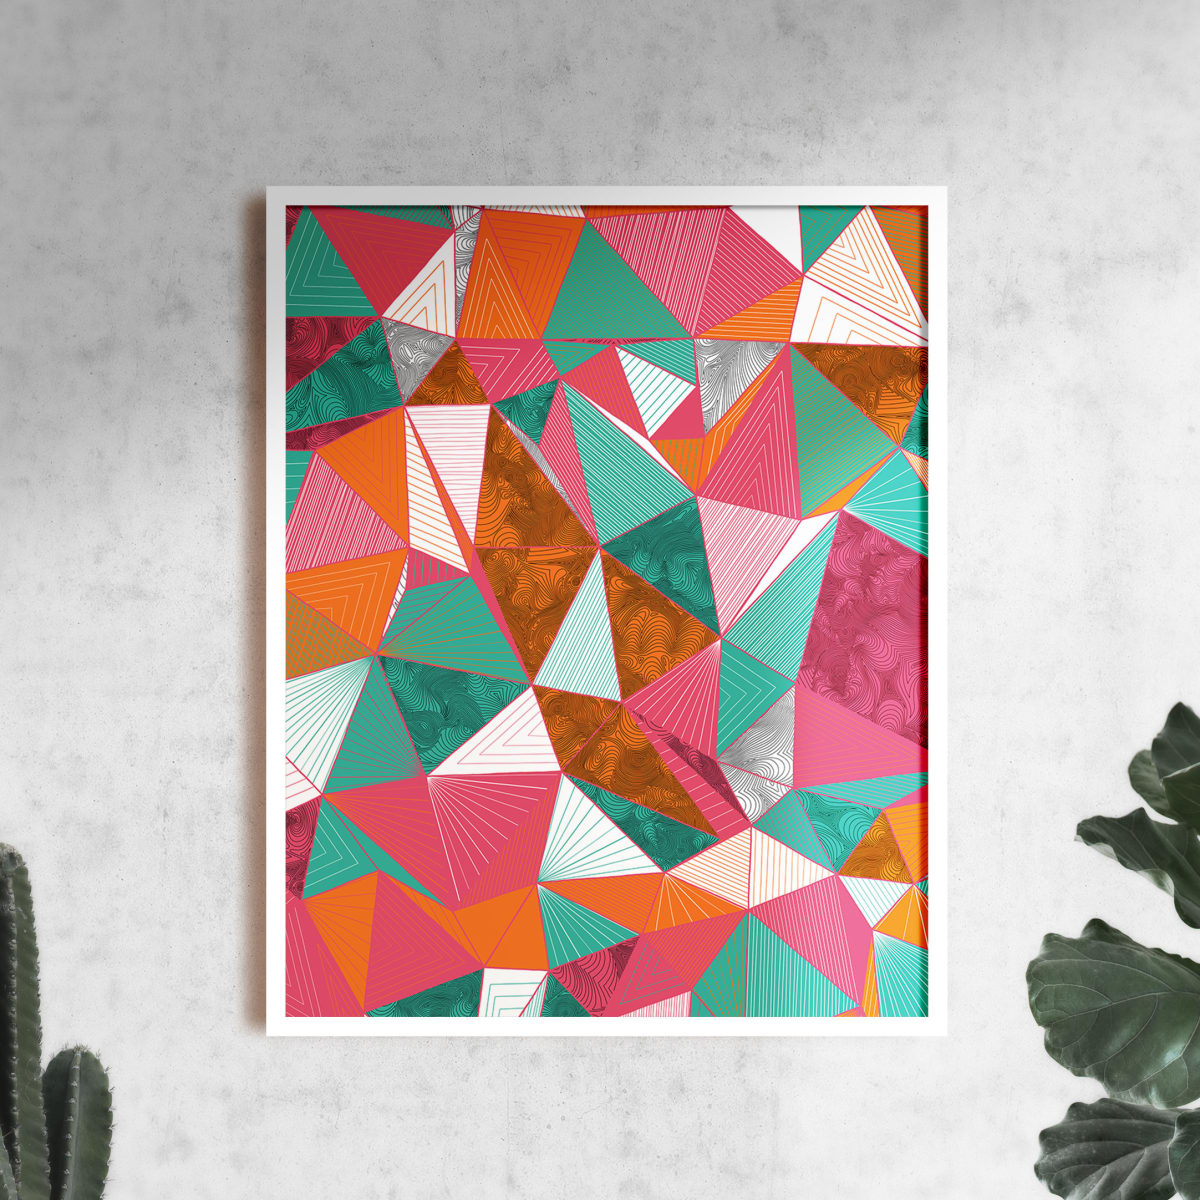 "Conscious Growth 082" Large One-of-a-Kind Print by Debbie Clapper  Image: Conscious Growth Print 082, a pink, orange, green, black and white one of a kind archival modern art print